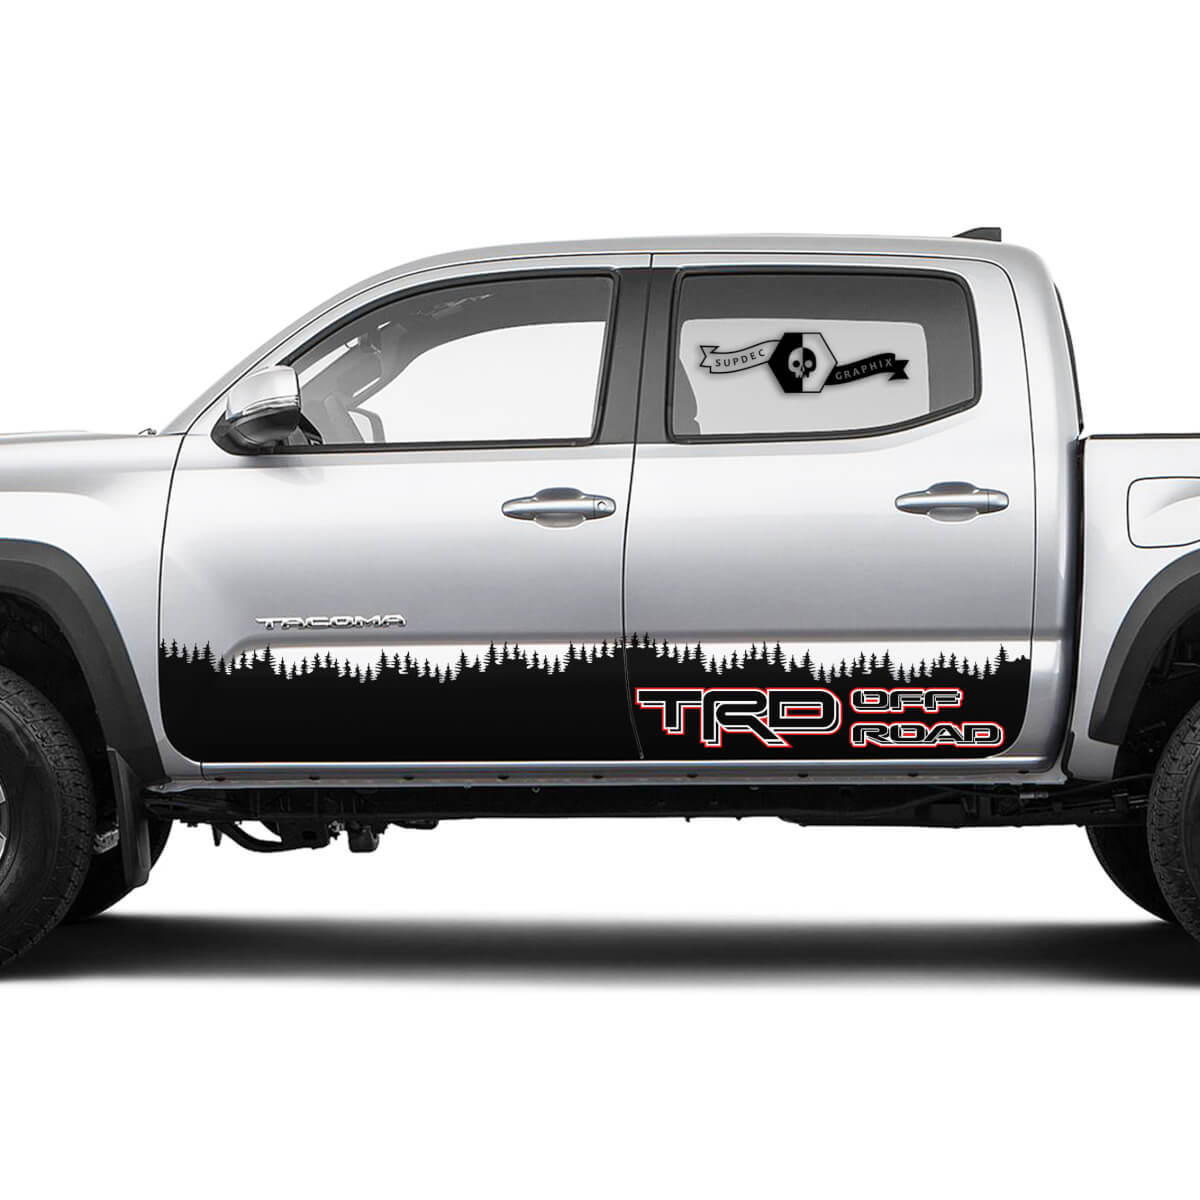 TRD Off Road  Rocker Panel Mountain  Vinyl Stickers TOYOTA Decals Stickers for Tacoma Tundra 4Runner Hilux